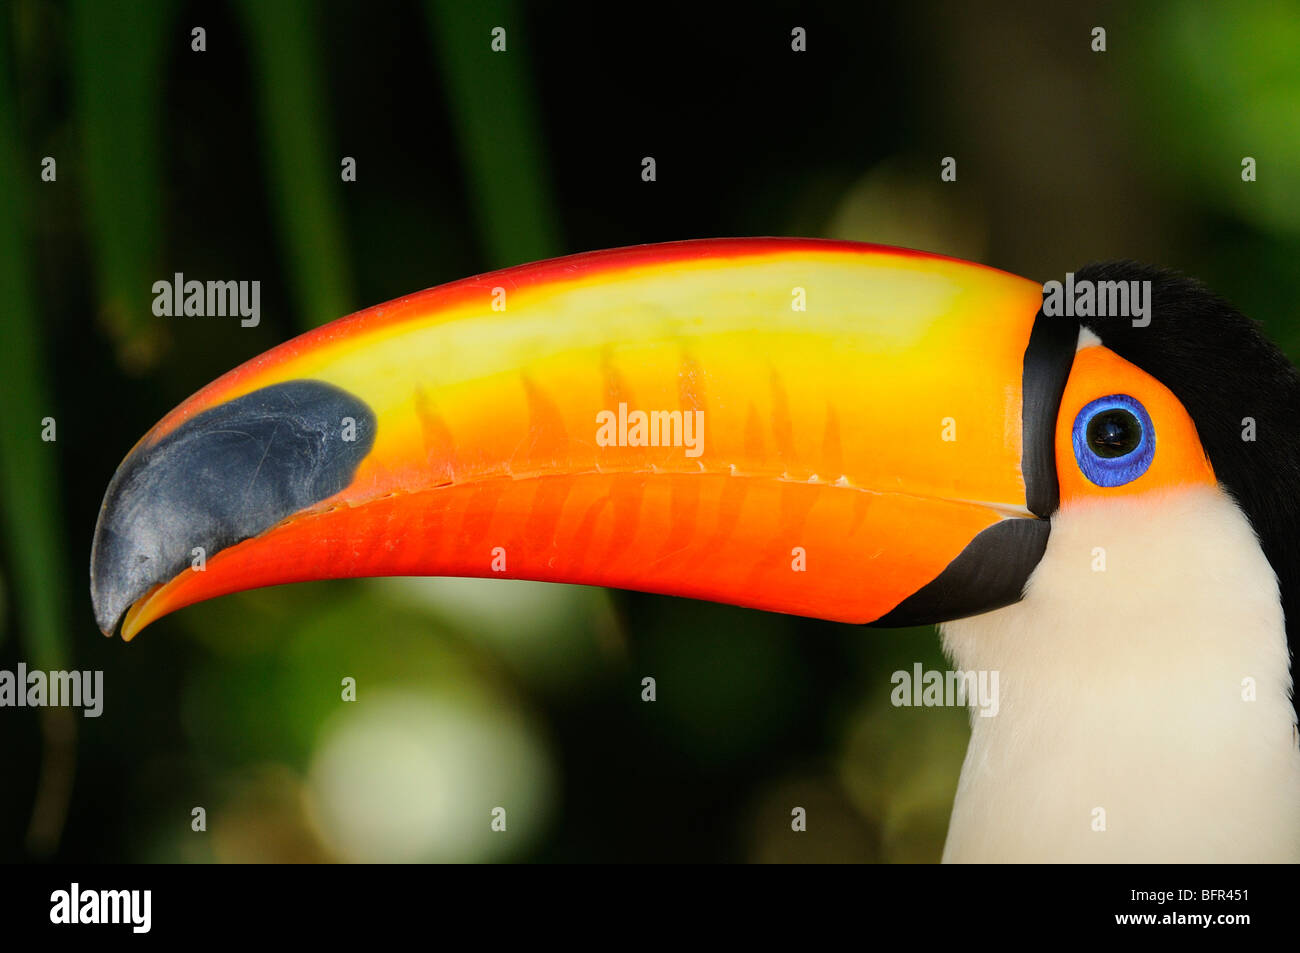 Toco Toucan (Ramphastos toco) close-up showing head and beak, captive, Brazil. Stock Photo